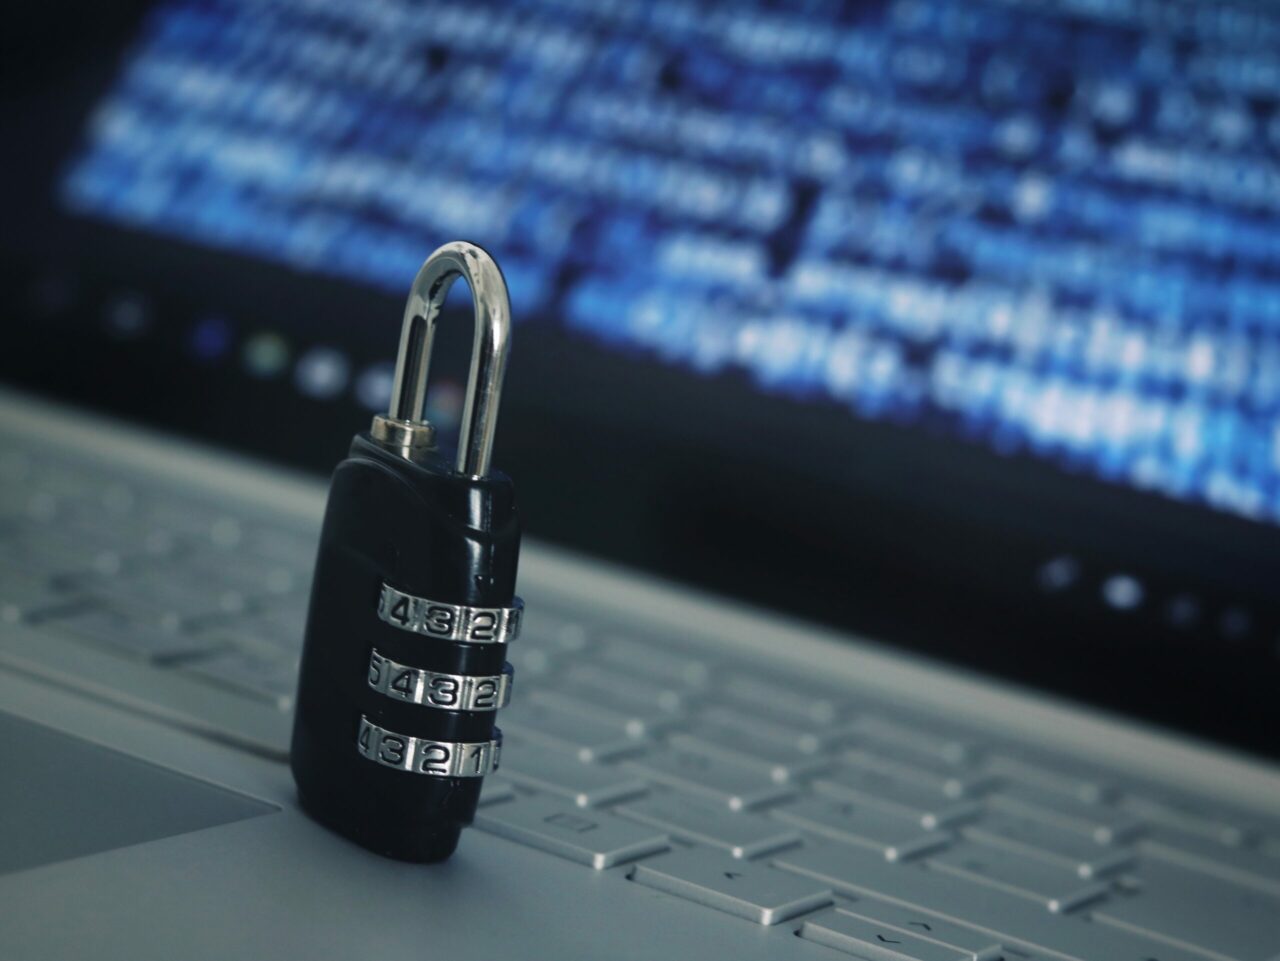 combination lock sitting on a keyboard representing cybersecurity measures